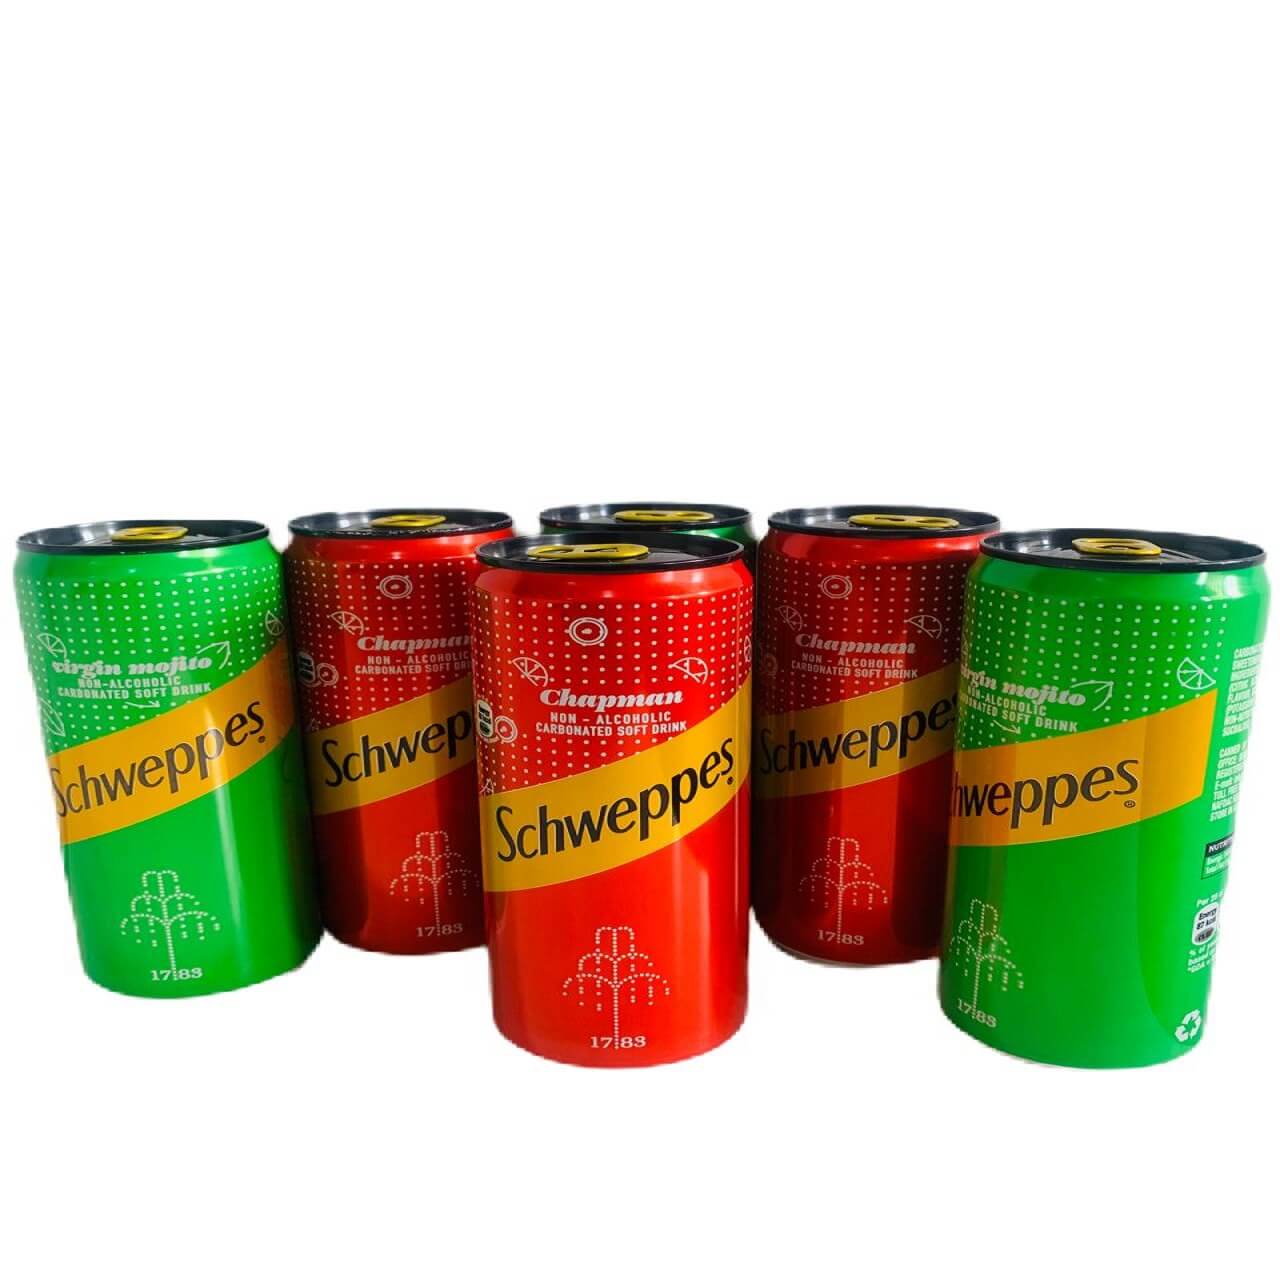 cans of schweppes